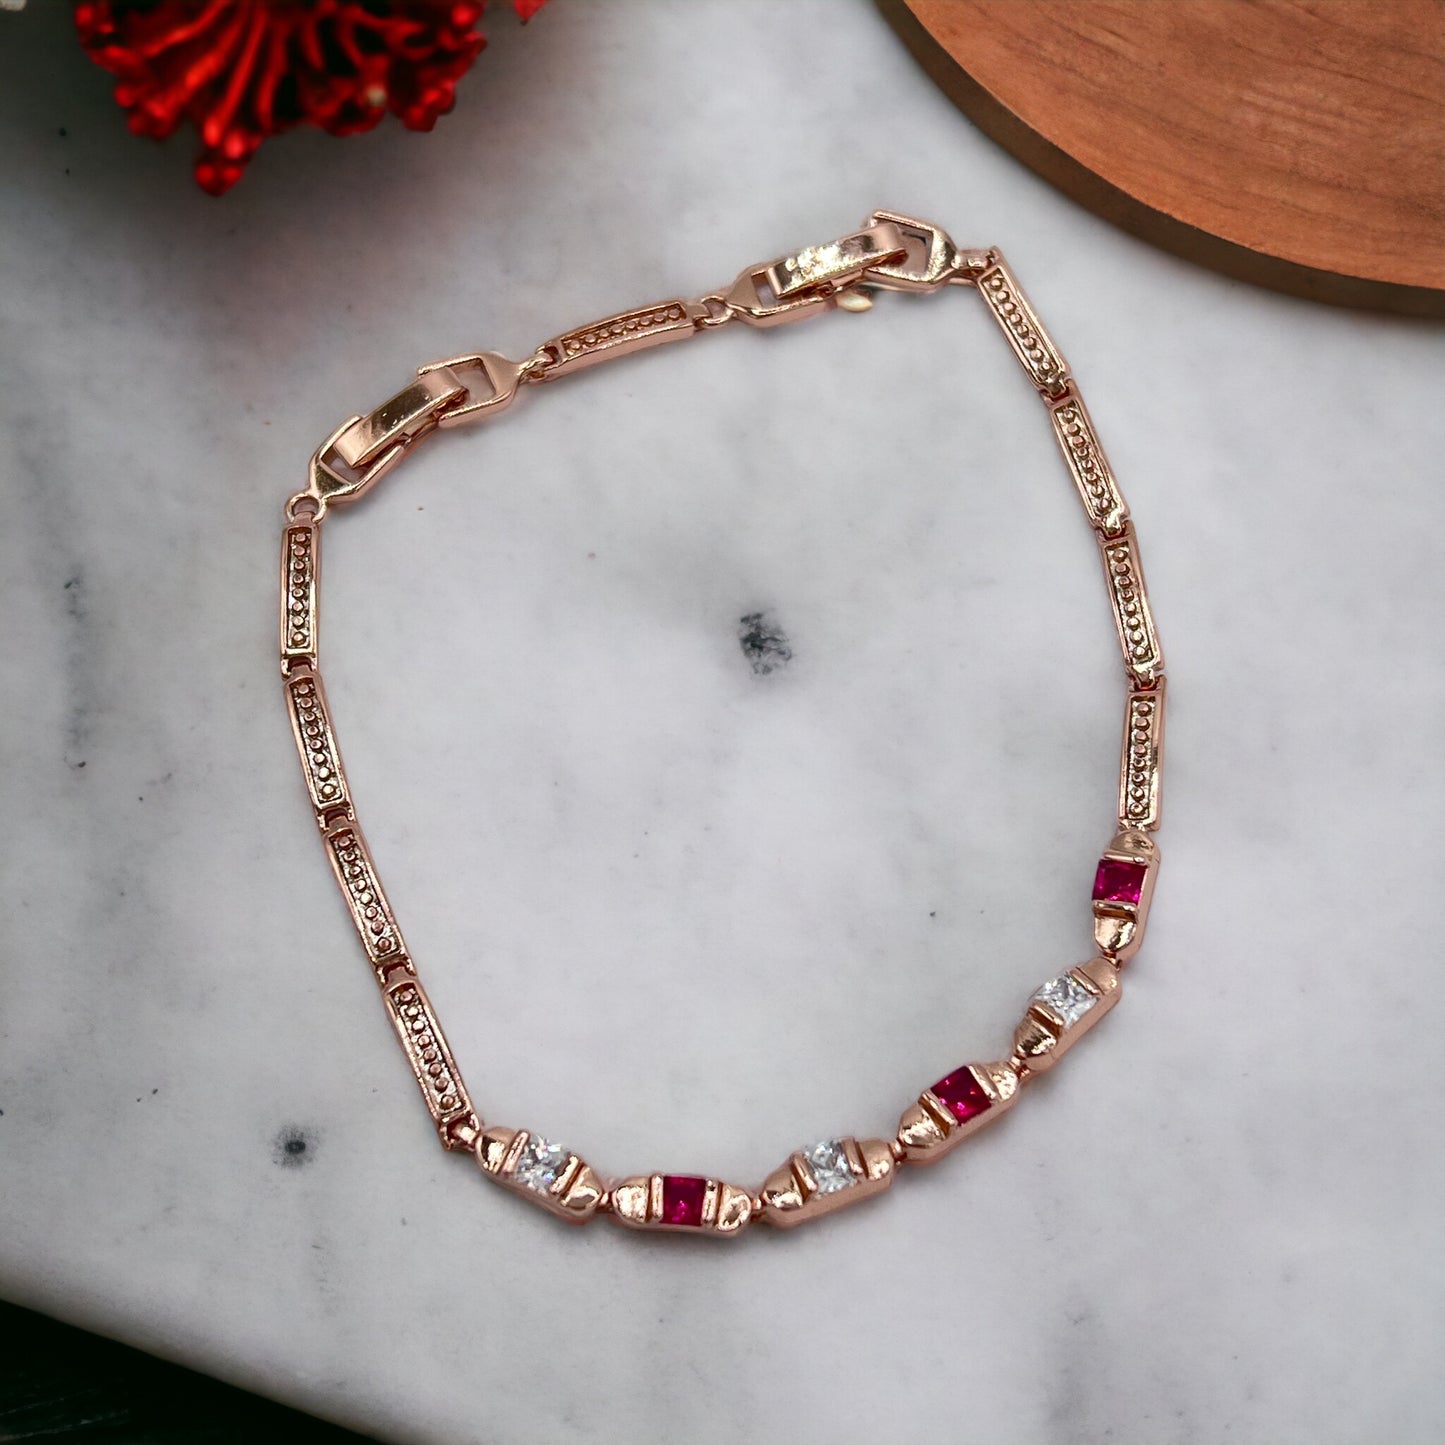 Radiant Ruby Red and White Square Stones Handcrafted Bracelets in Rose Gold